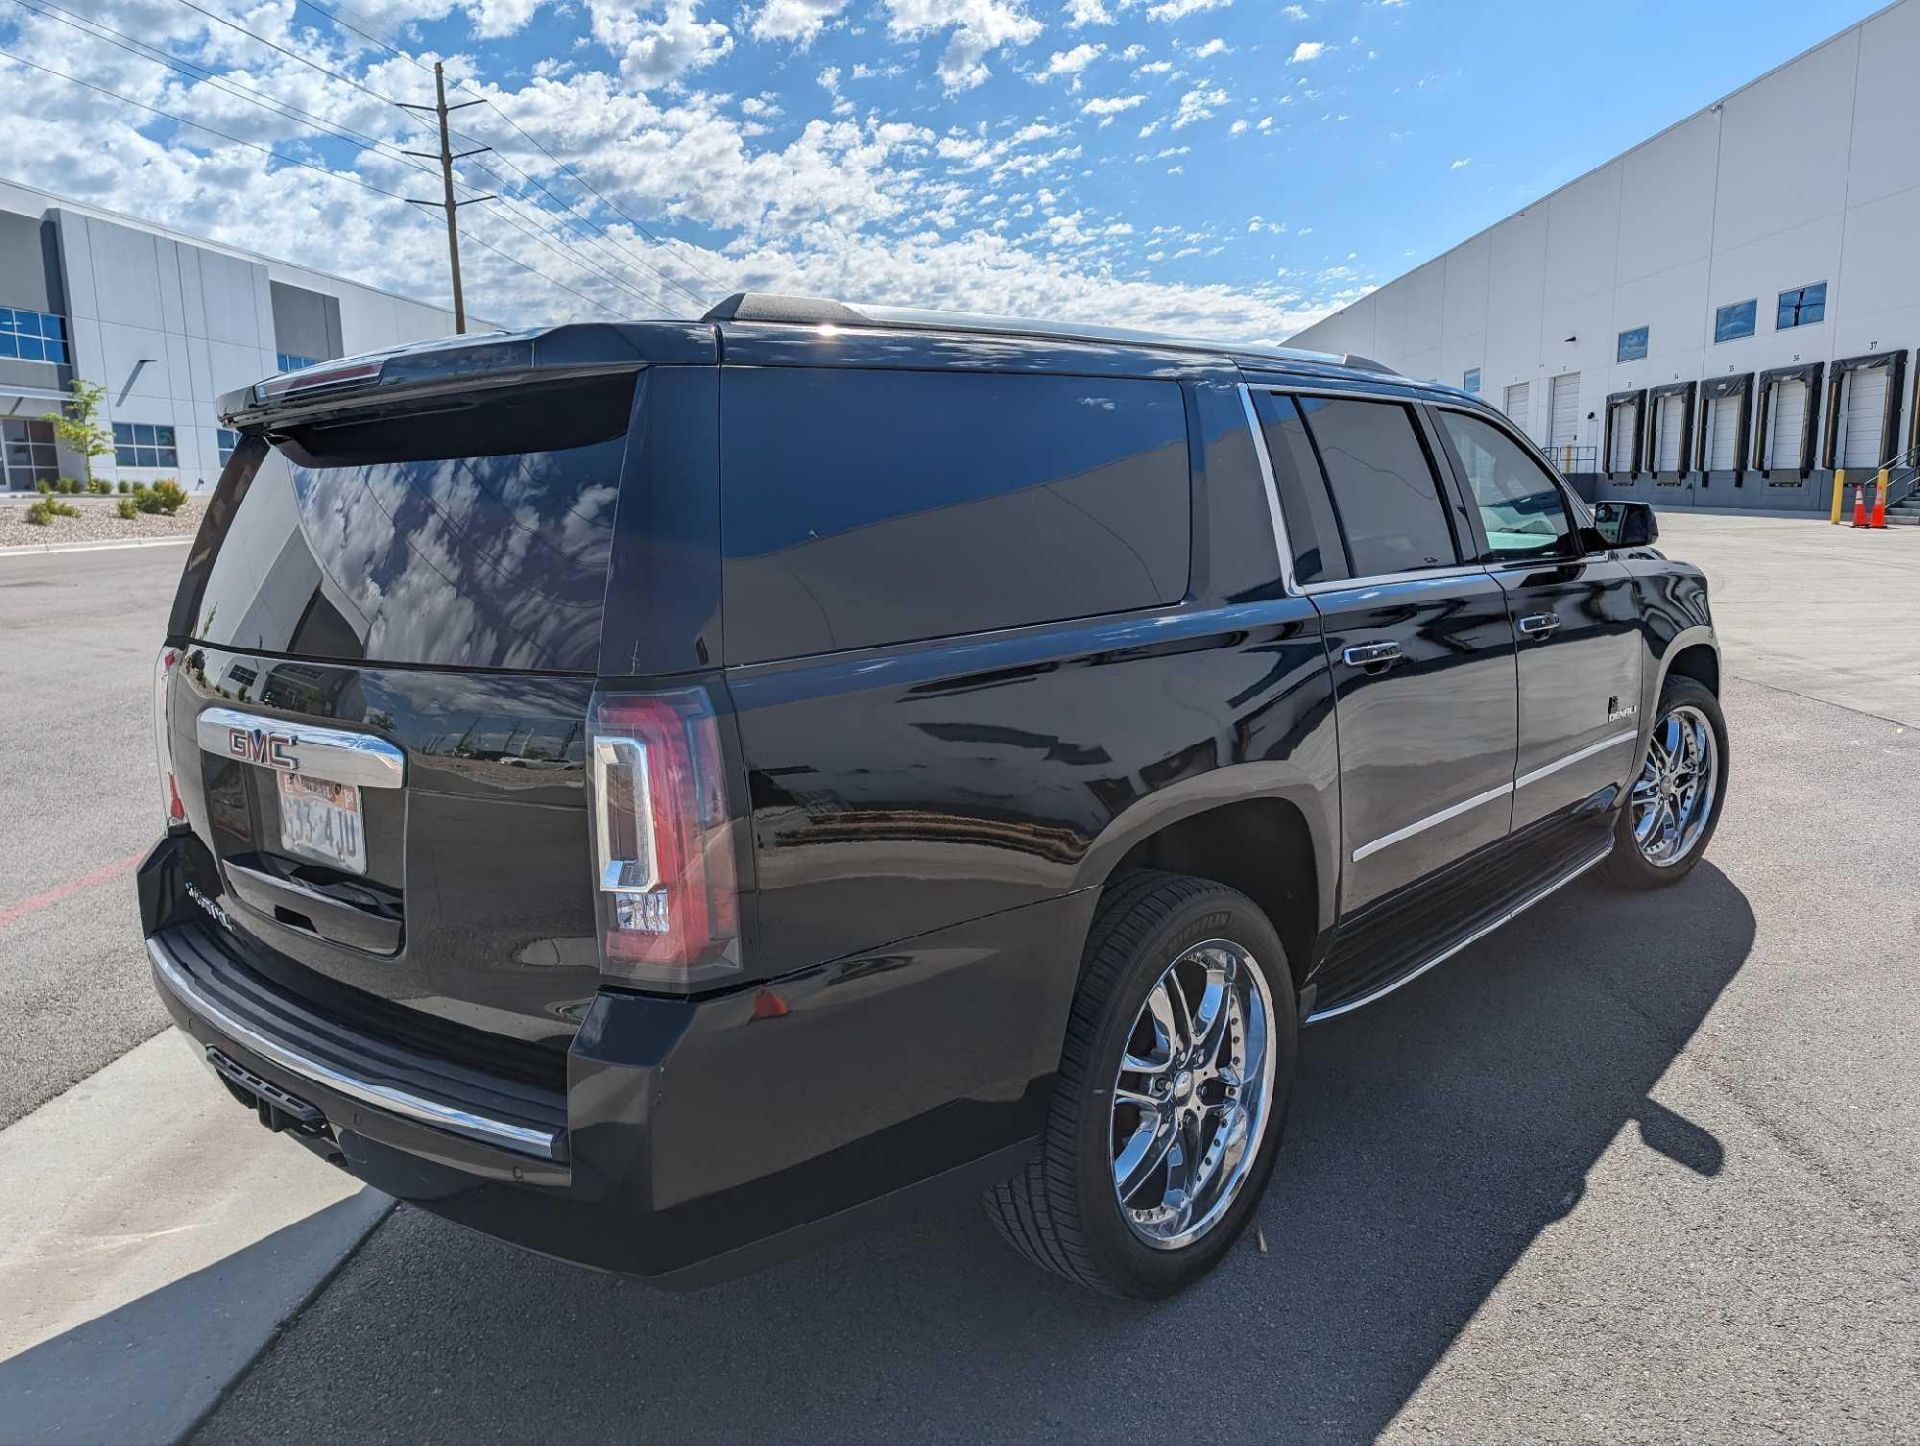 2017 GMC Yukon XL Denali w/ 111K Miles, 4wd, v8 VIN #: 1GKS2HKJ4HR323051 Features & notes: runs and - Image 5 of 16